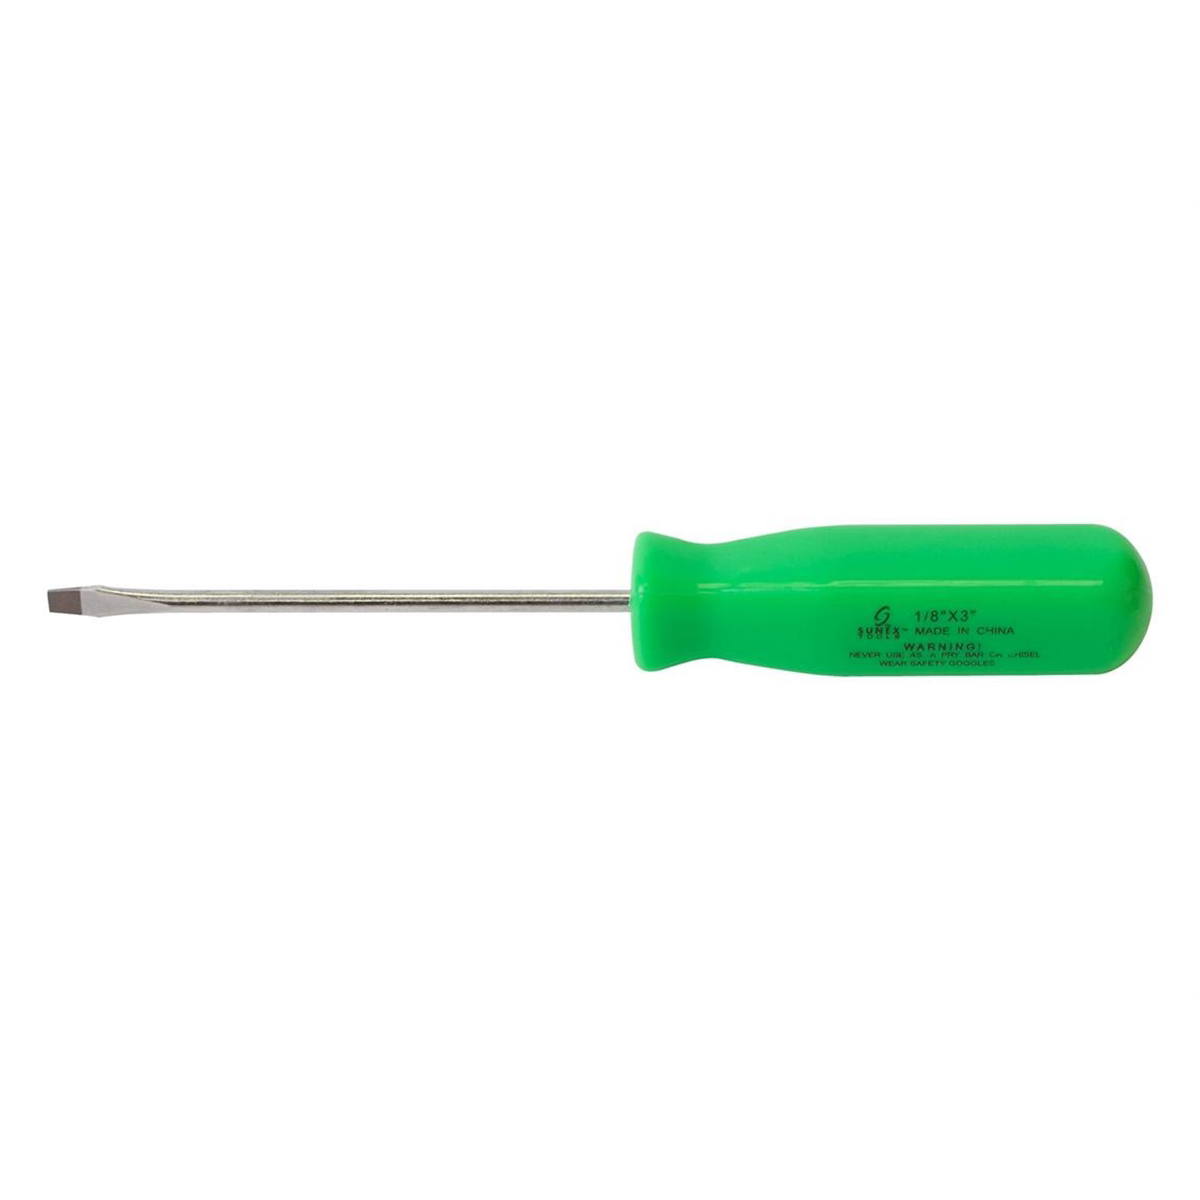 1/8" x 3" Slotted Screwdriver